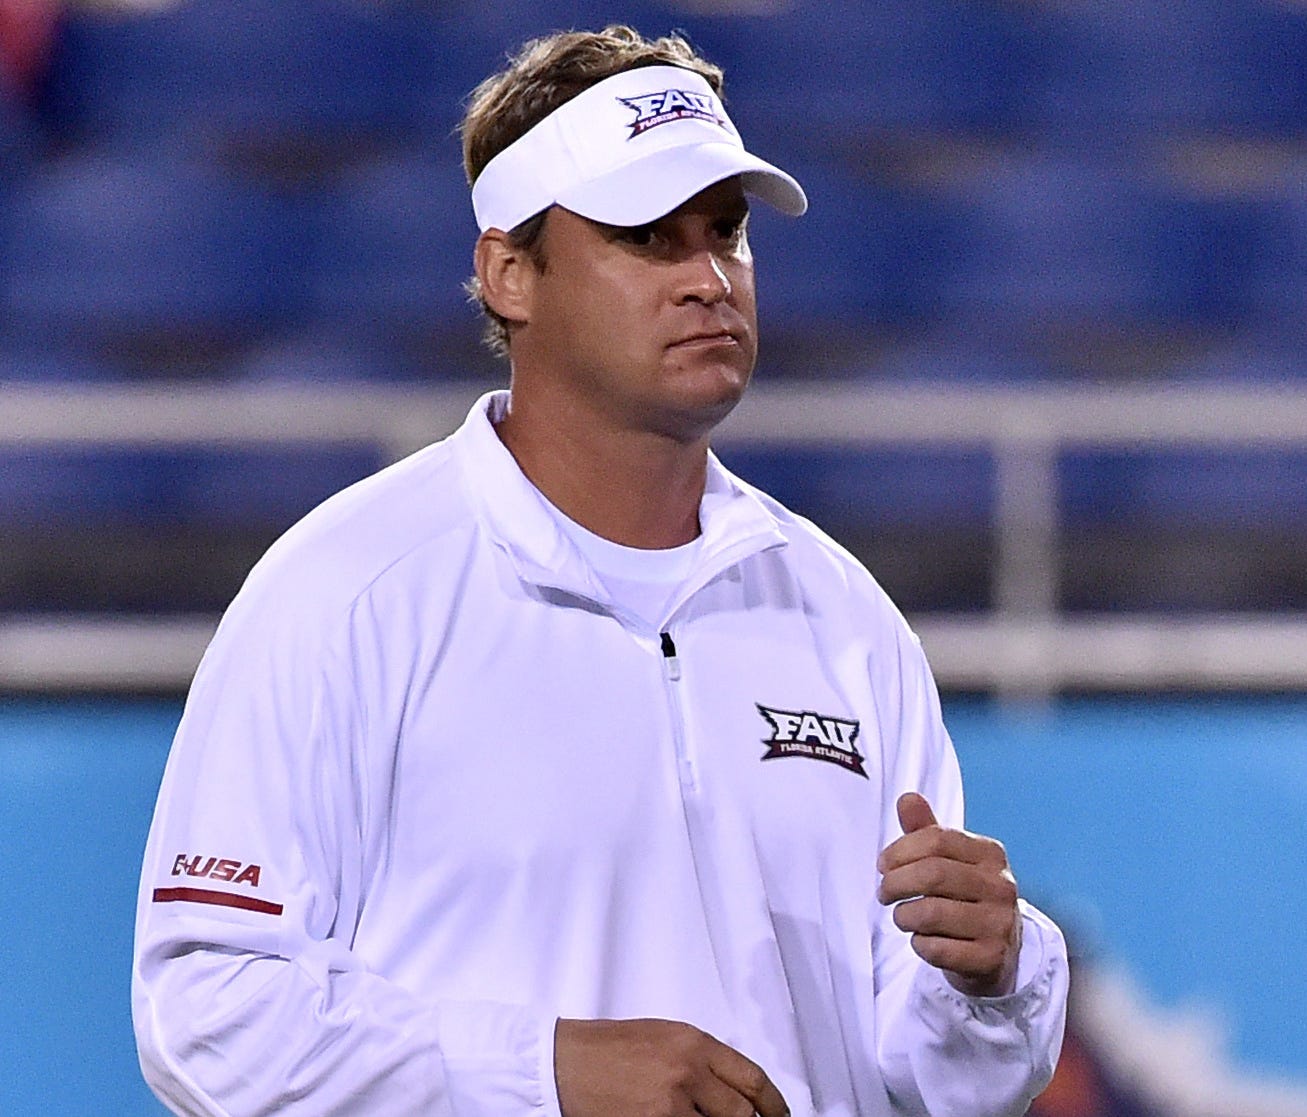 Florida Atlantic Owls head coach Lane Kiffin prior to a game against Fiu Golden Panthers at FAU Football Stadium.